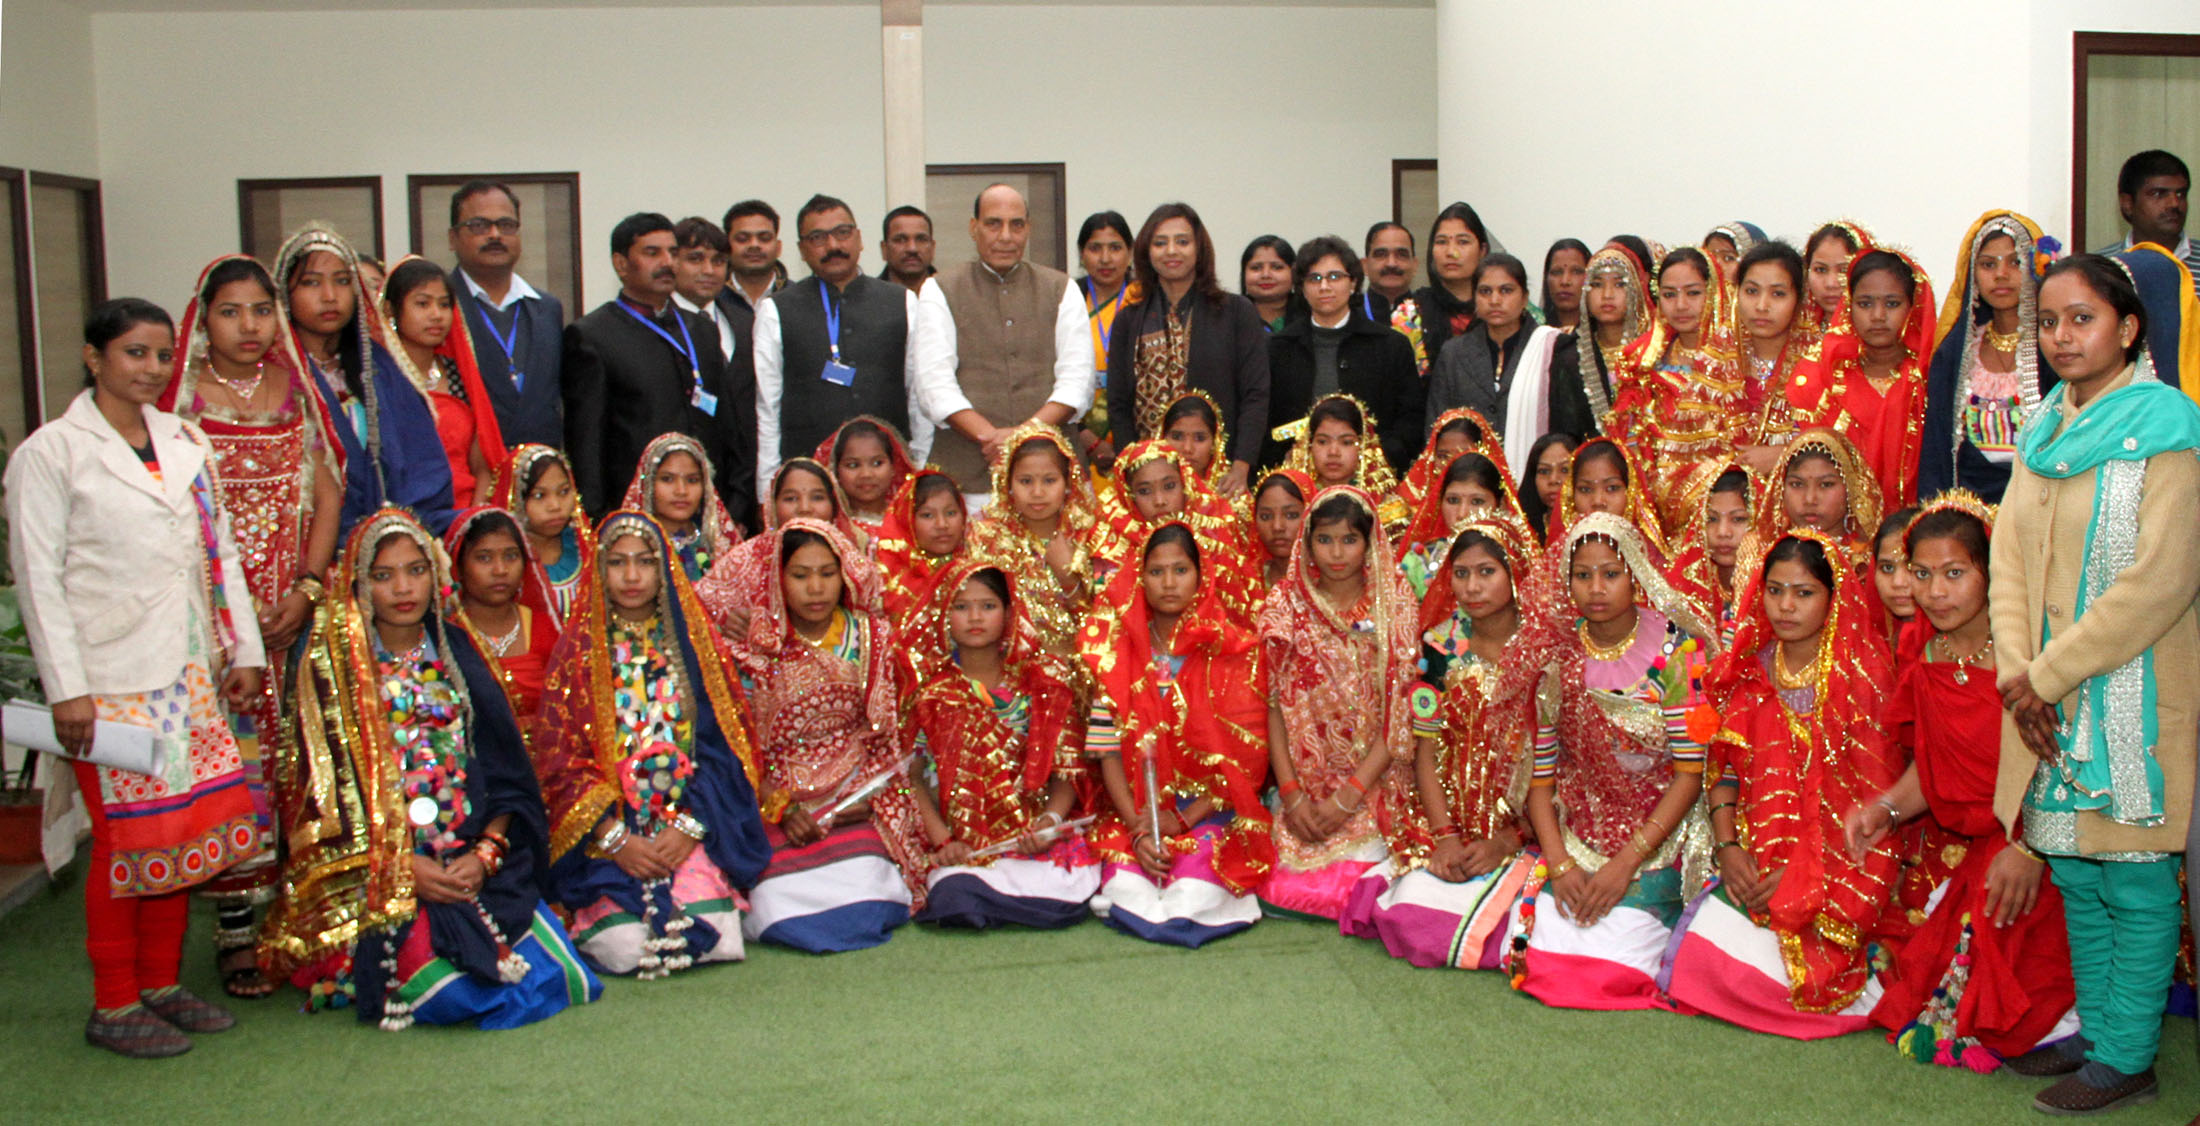 The Union Home Minister, Shri Rajnath Singh in a group photograph with the children of Tharu tribe, in New Delhi on January 20, 2016.